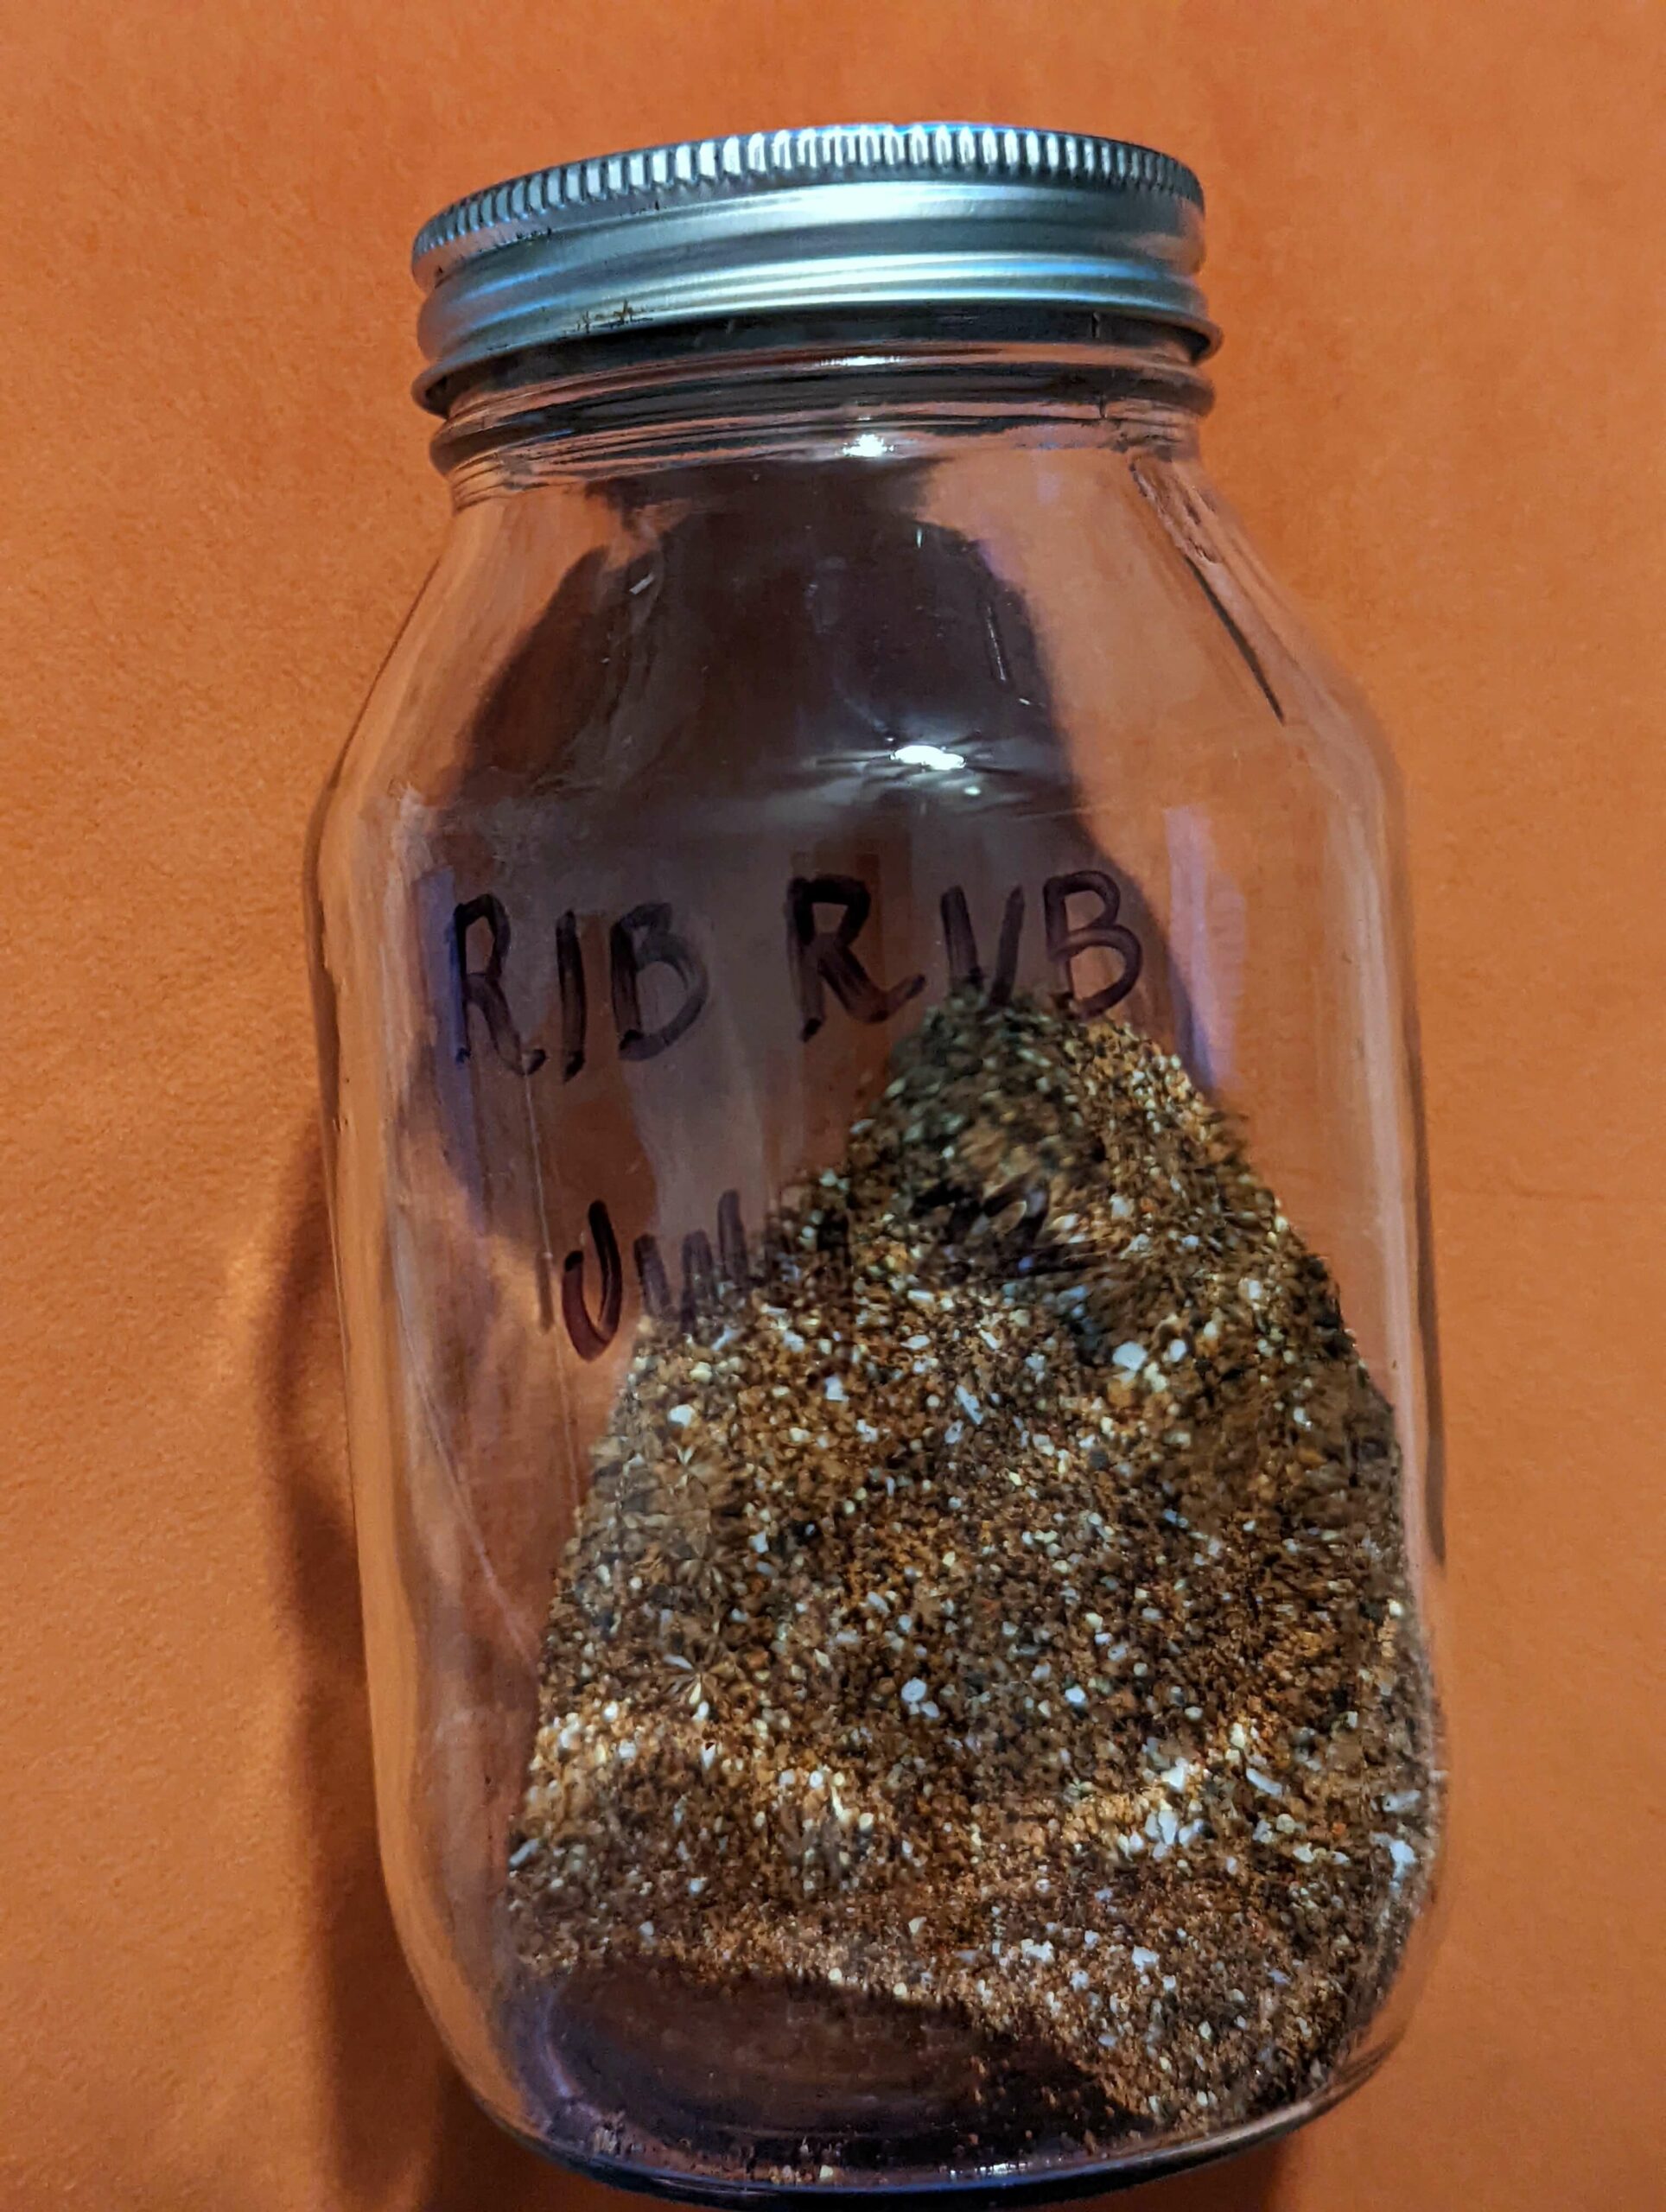 Store the ingredients for our rib rub recipe in an airtight container.